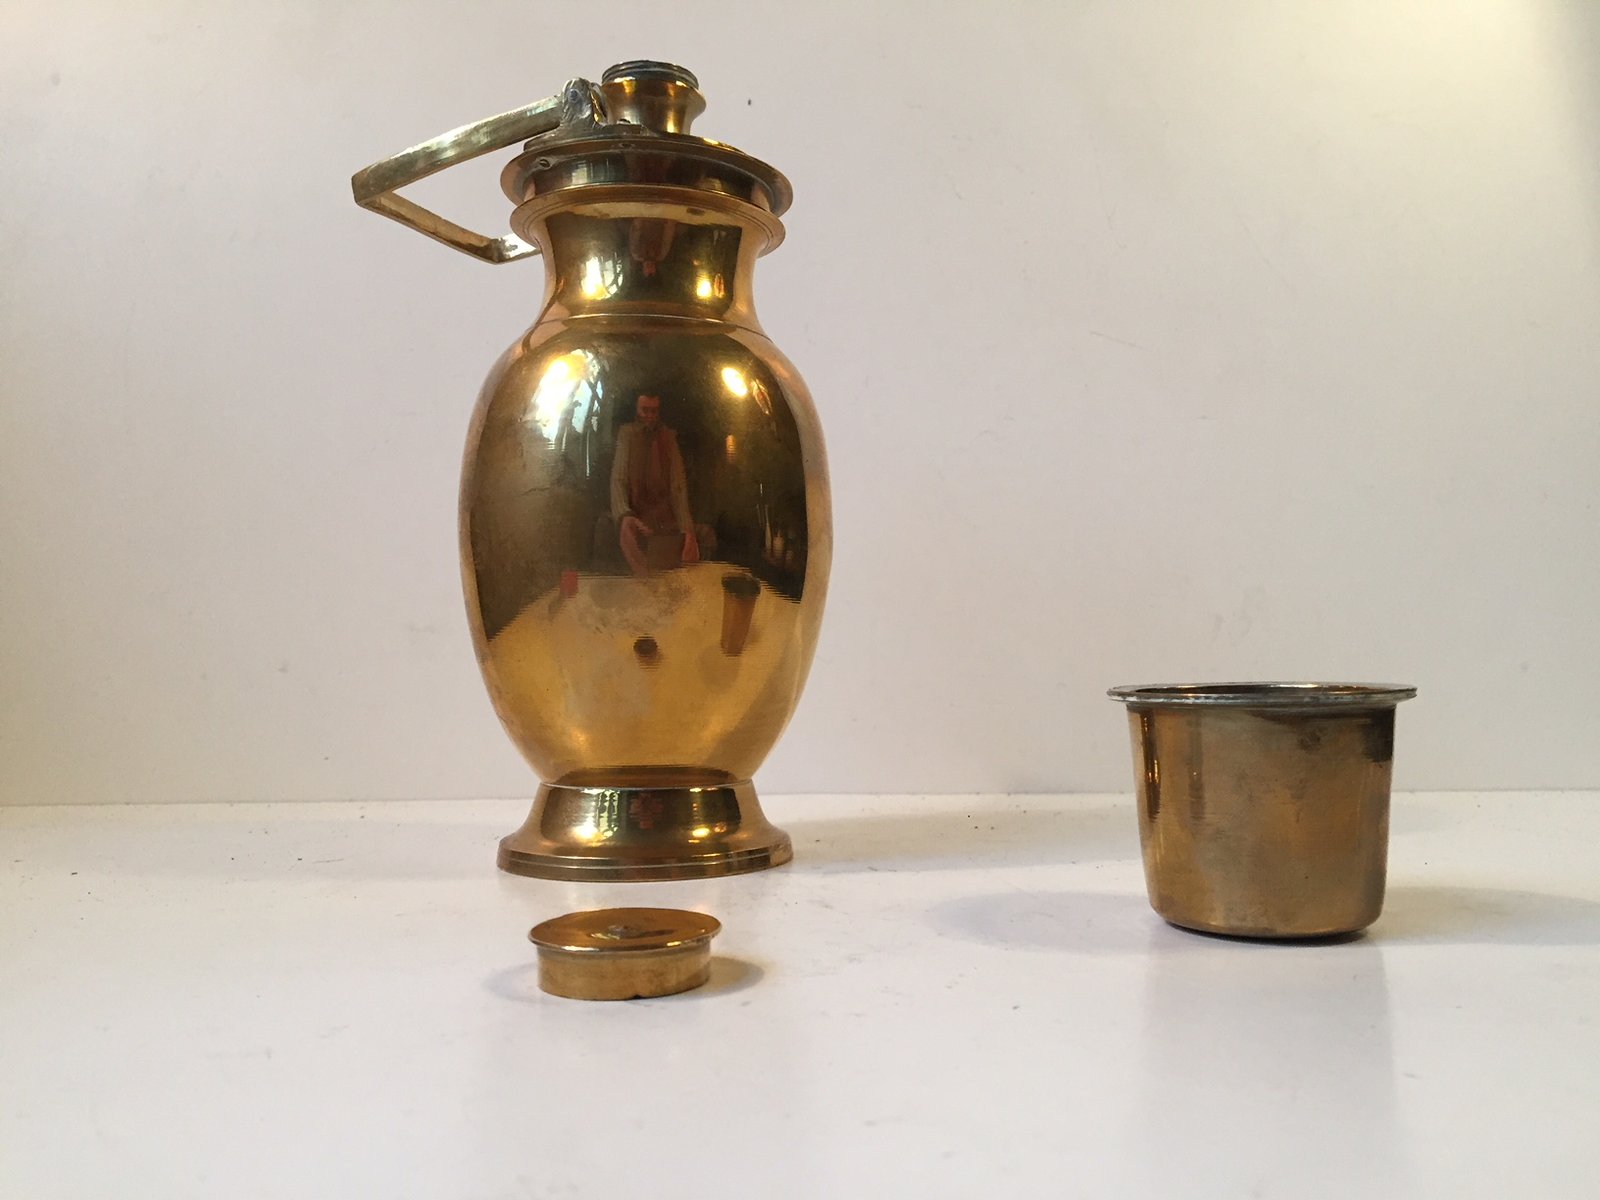 Vintage Brass Thermos with Screw Lid, 1930s for sale at Pamono